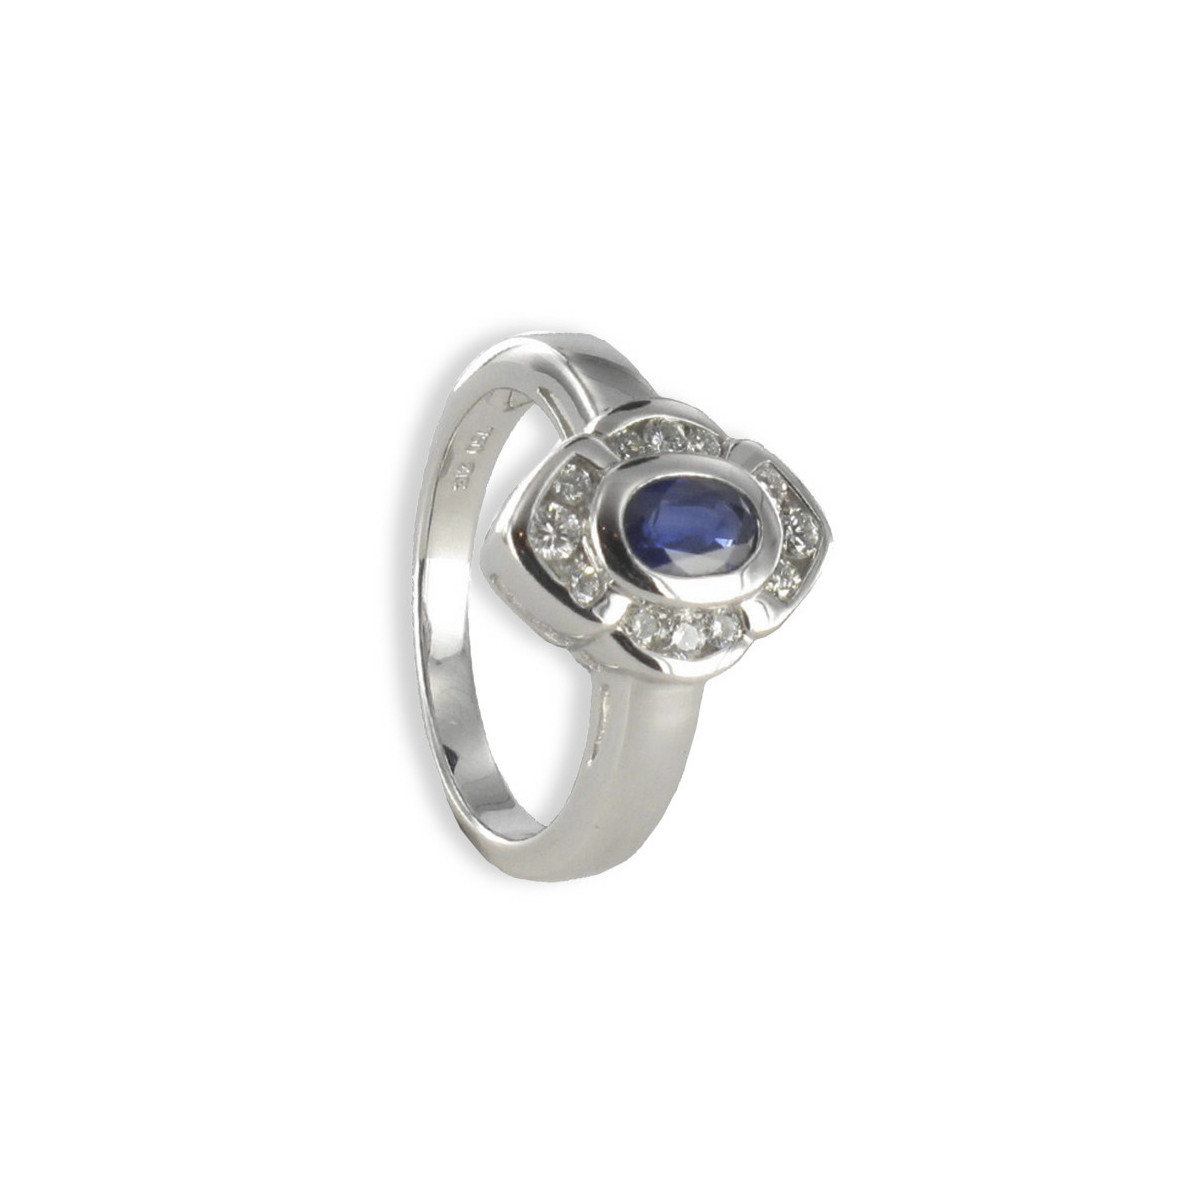 RING IN GOLD WITH SAPPHIRE 0.65 CARAT